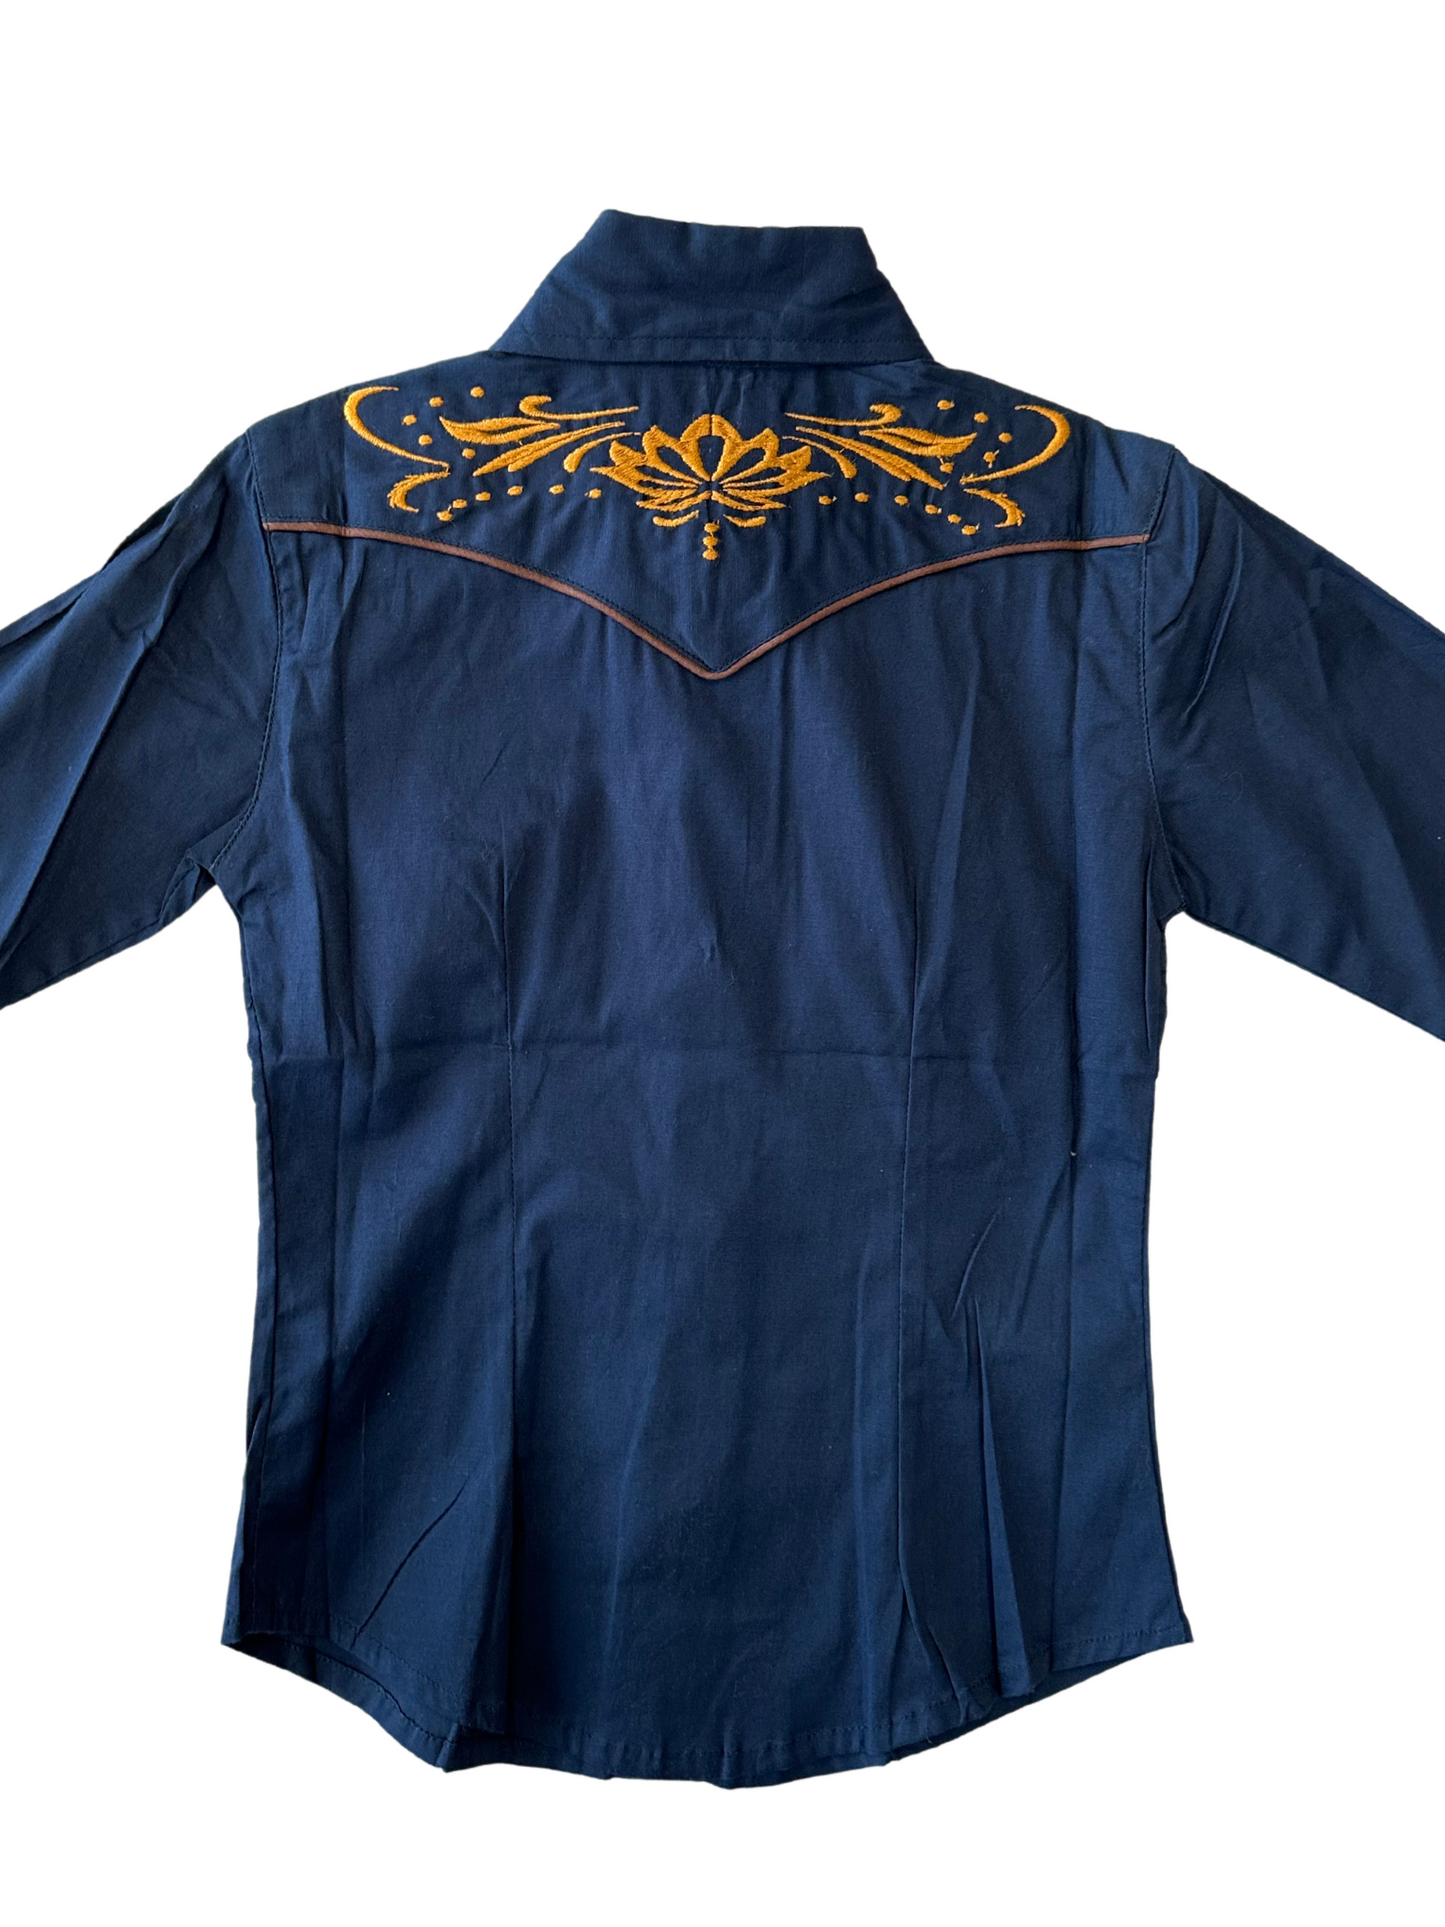 Girl's Floral Embroided Button Down Shirt - Navy